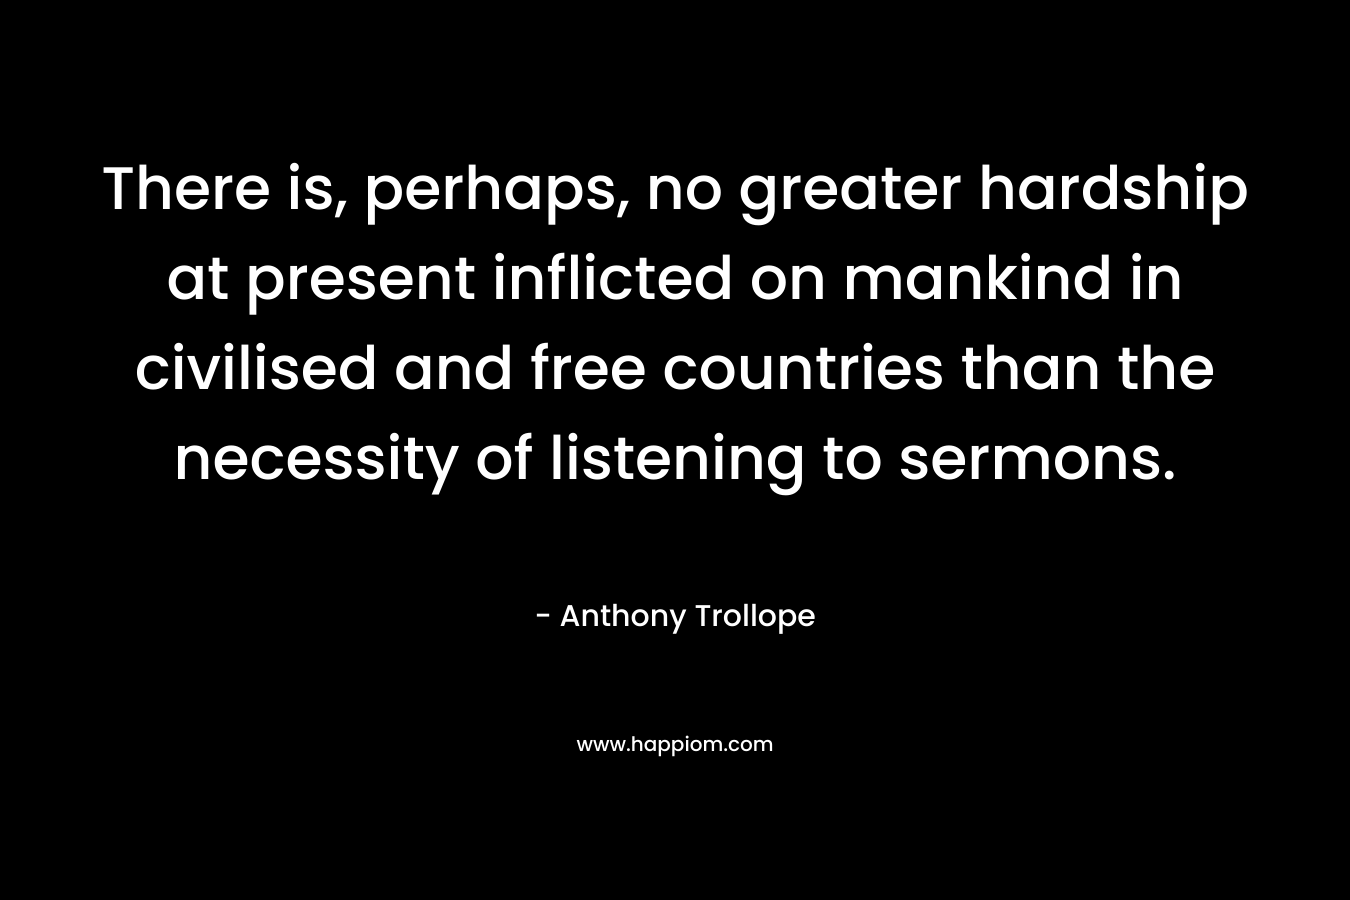 There is, perhaps, no greater hardship at present inflicted on mankind in civilised and free countries than the necessity of listening to sermons. – Anthony Trollope